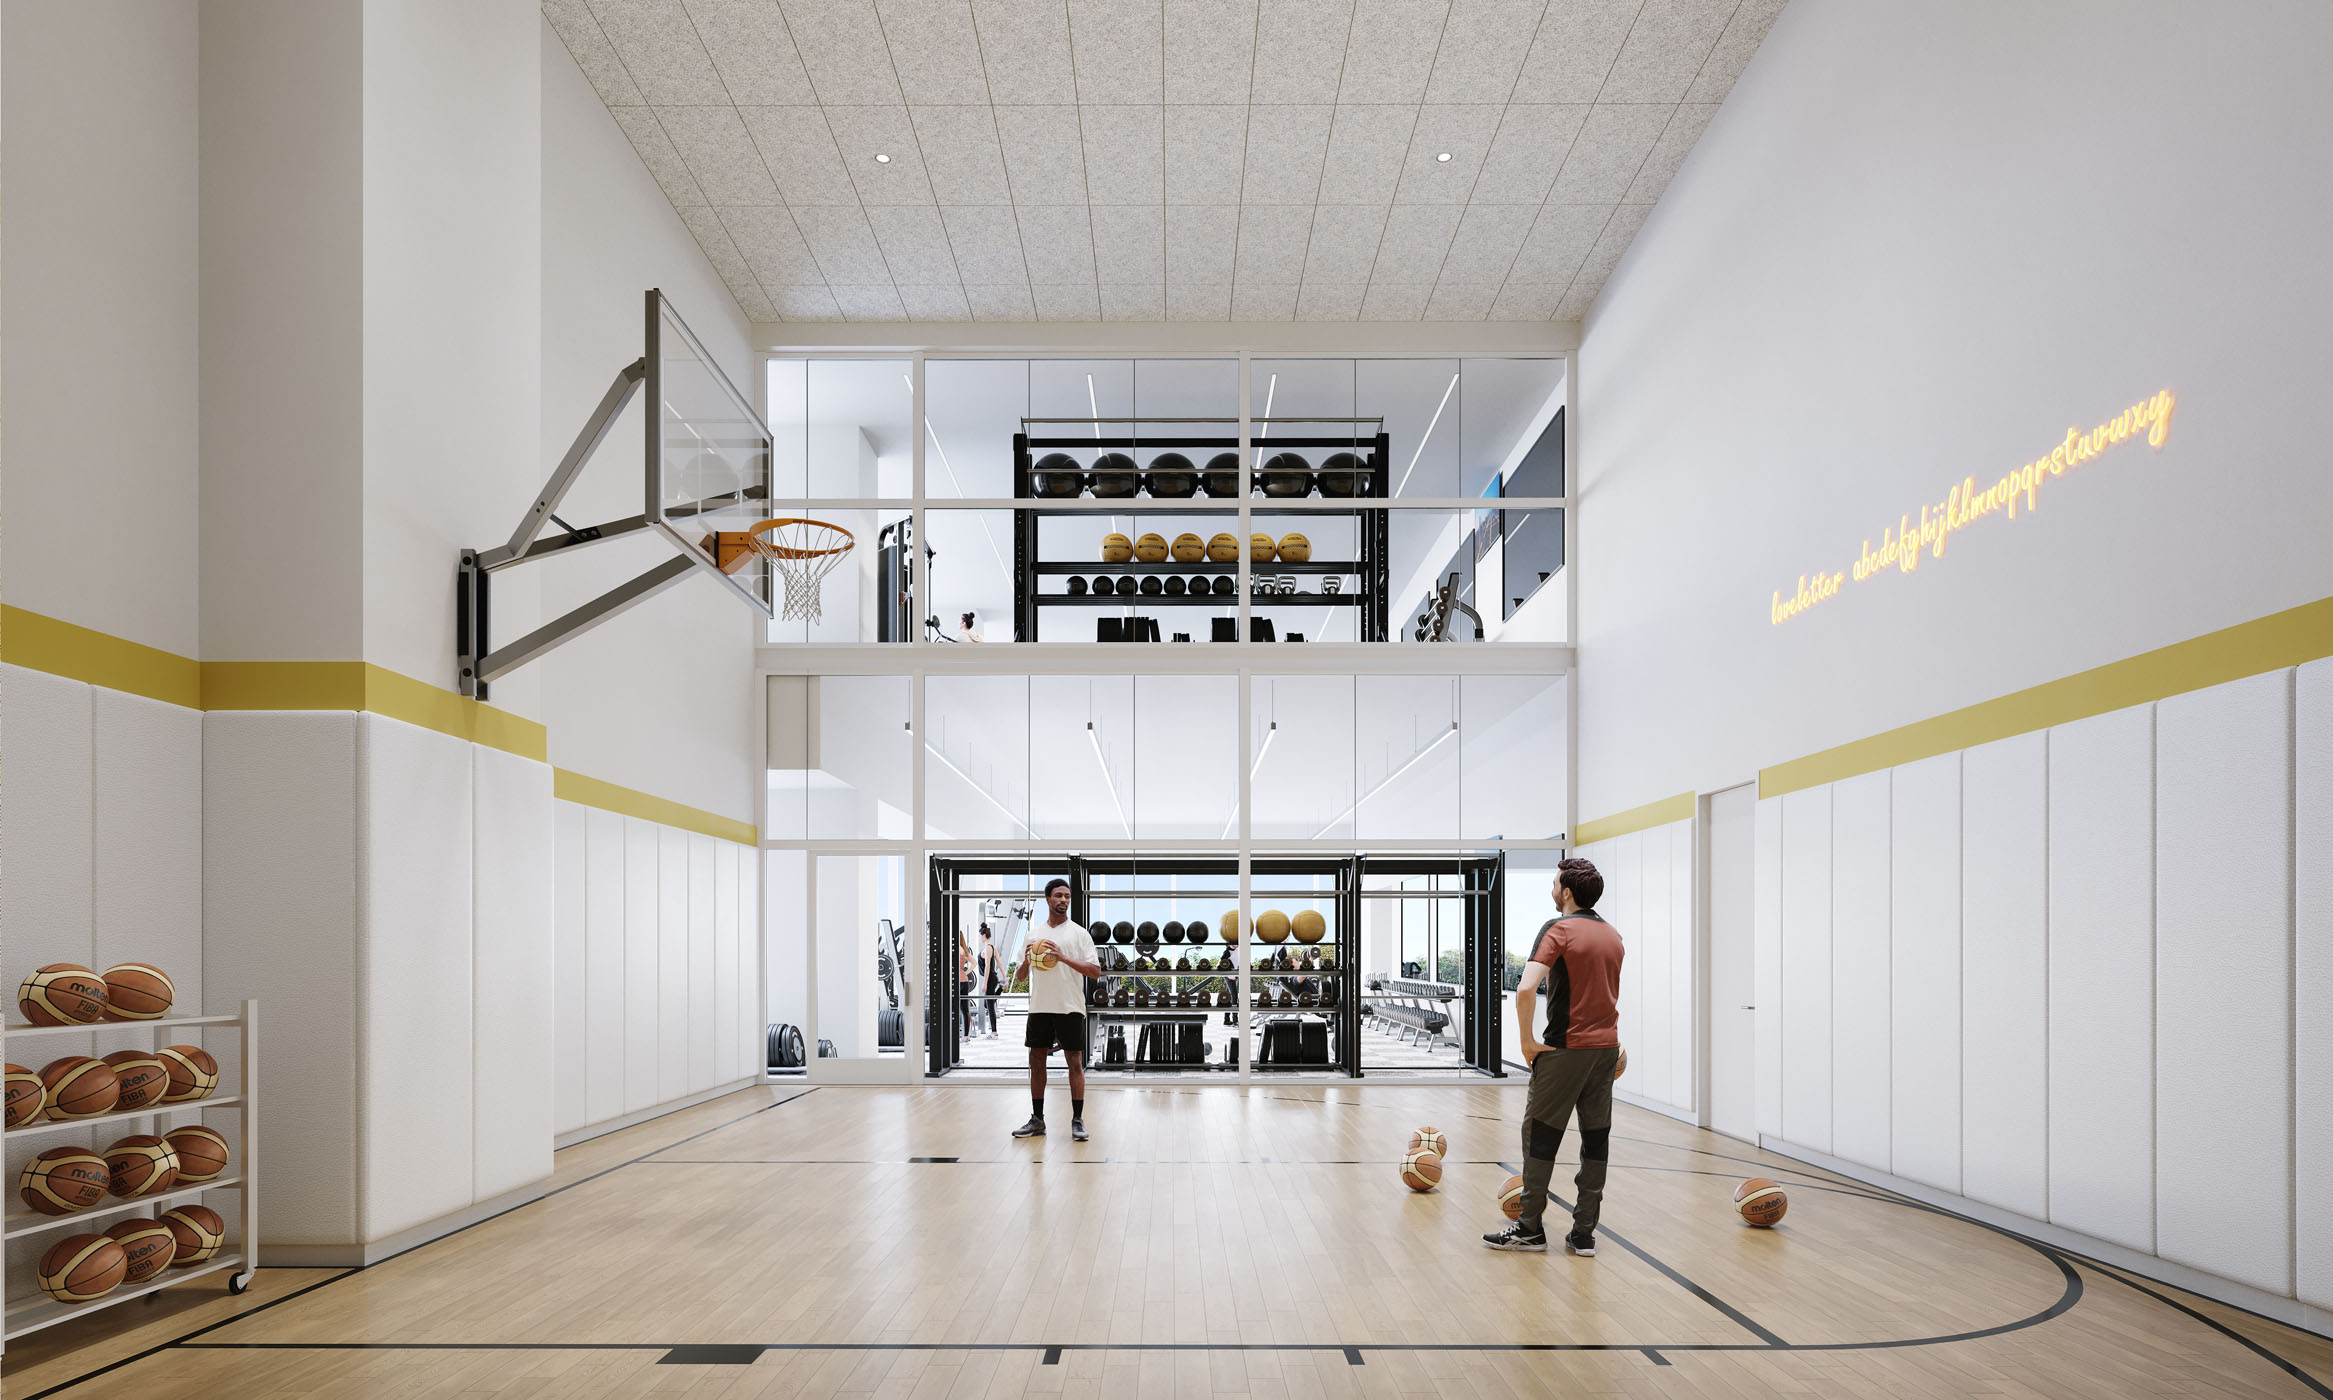 1000M indoor half court basketball court rendering with people playing